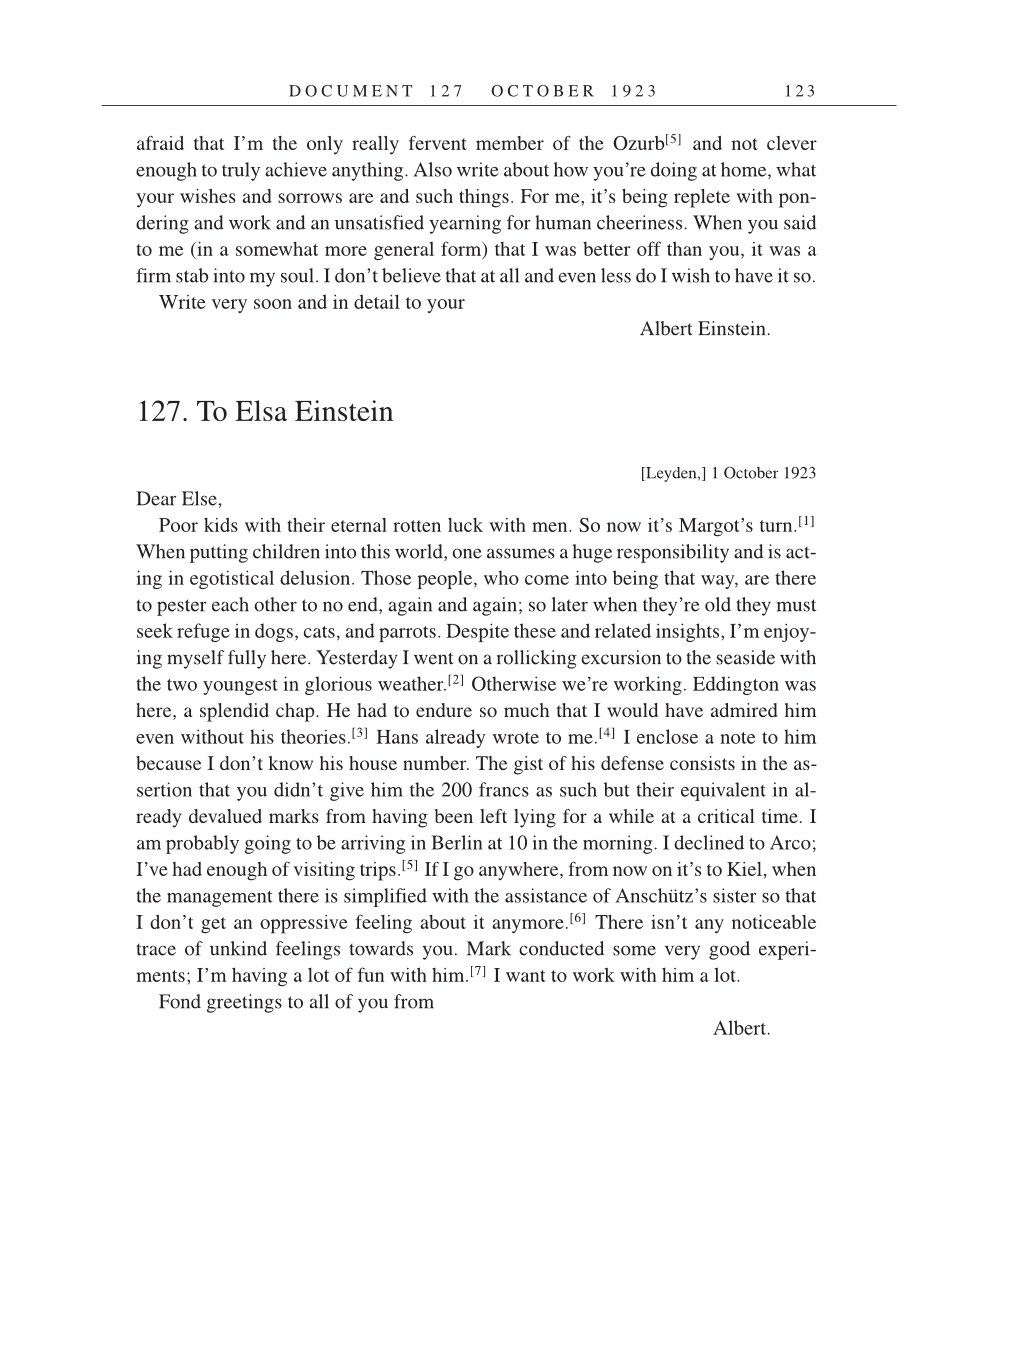 Volume 14: The Berlin Years: Writings & Correspondence, April 1923-May 1925 (English Translation Supplement) page 123